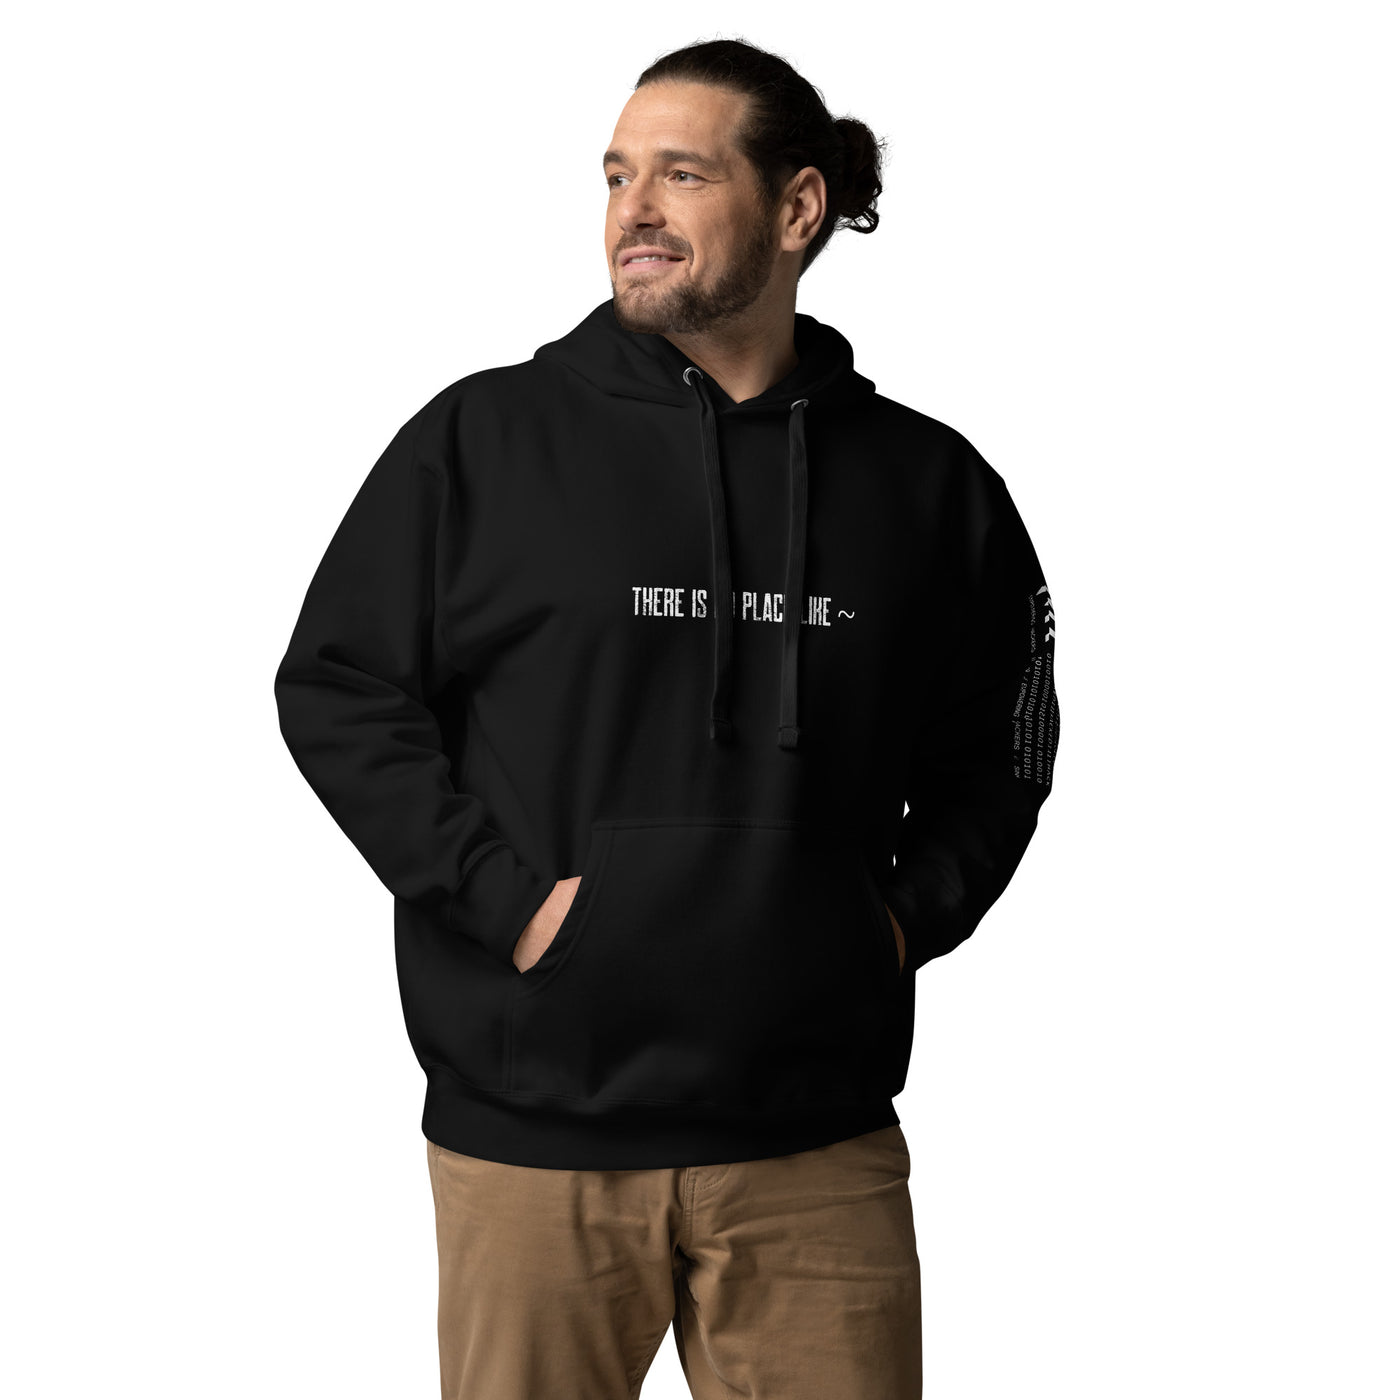 There is no Place like ~ V2 - Unisex Hoodie